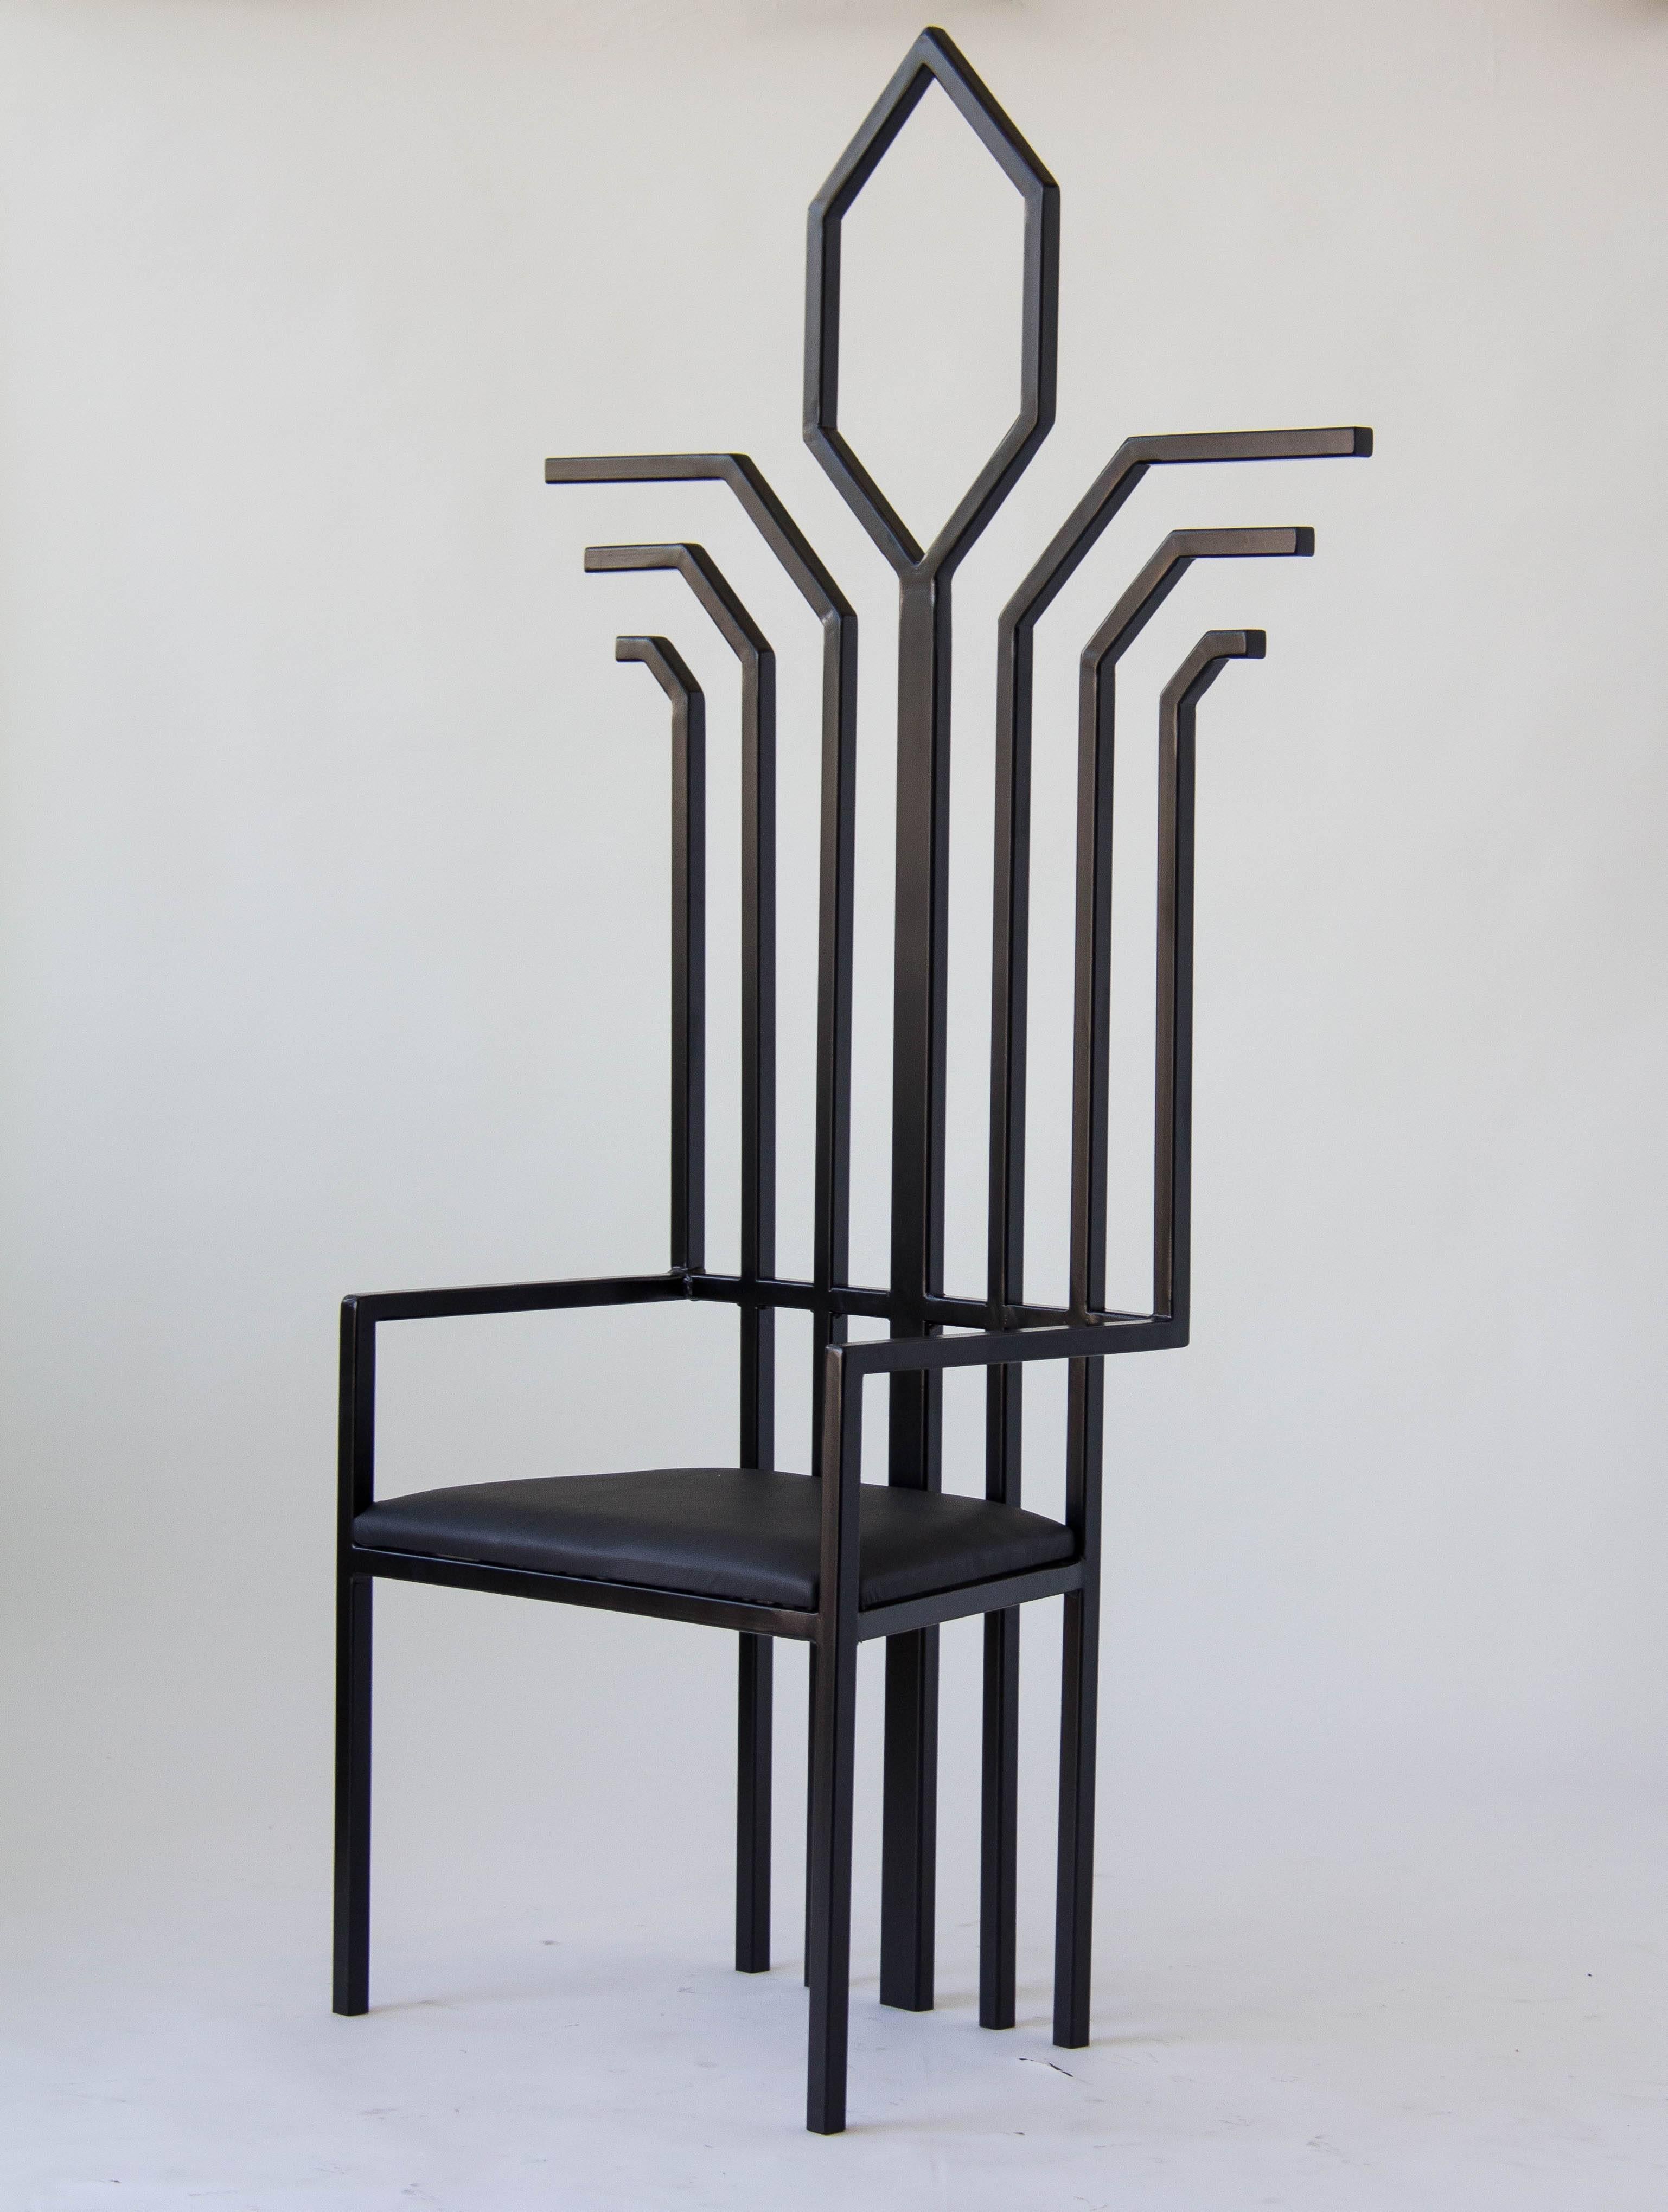 Unsigned entryway chair with a slatted back of squared steel tubing, powder coated black. The focal point of the chair is a large keyhole detail at the peak of its high back. The seat is upholstered in black leather. 

Condition: Excellent